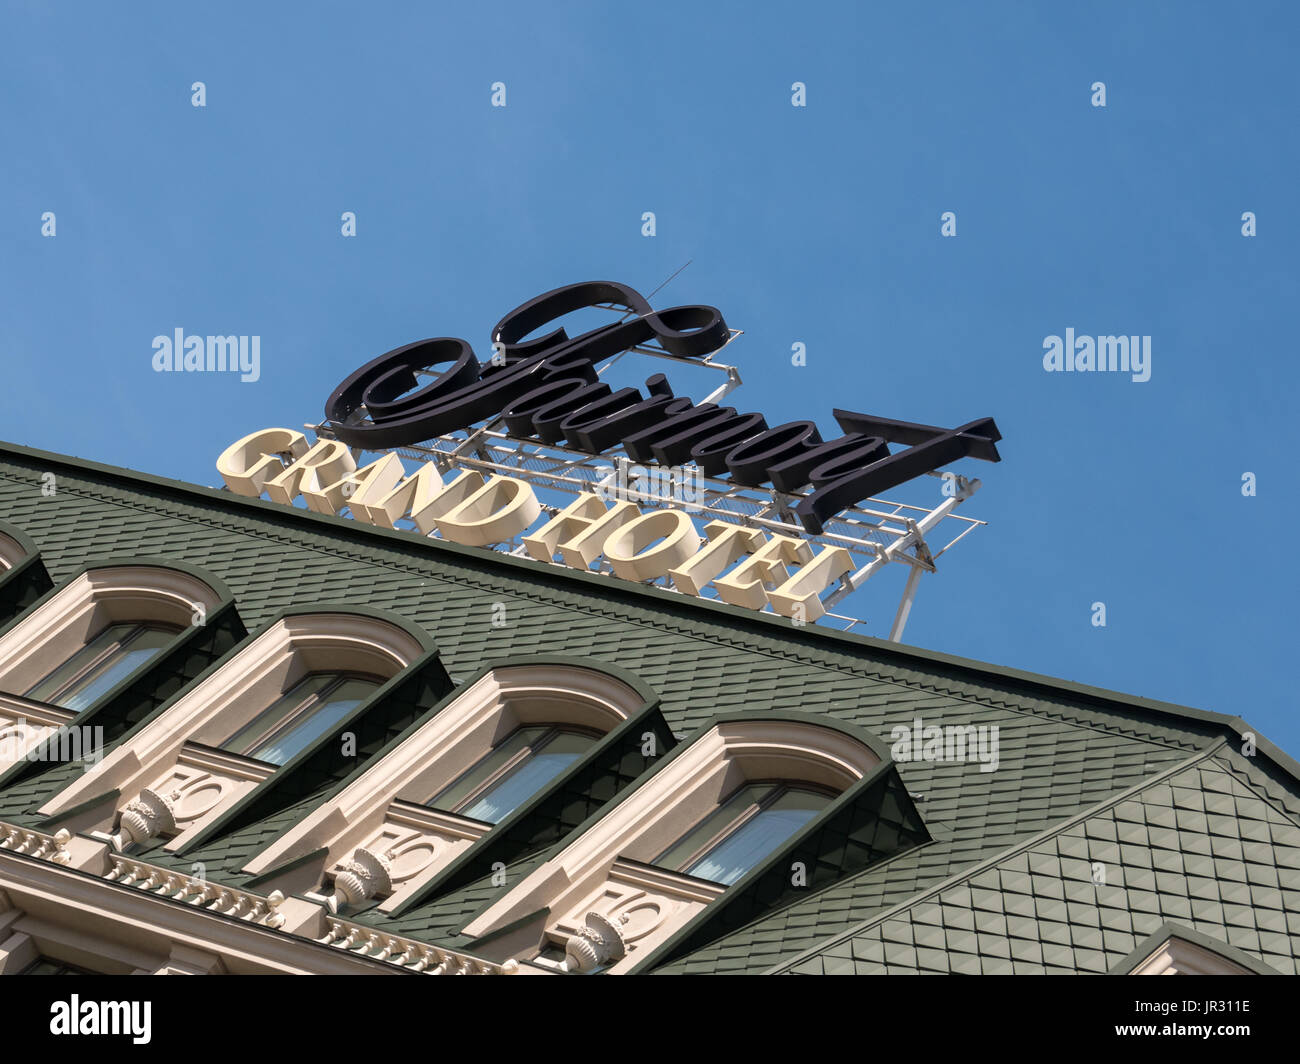 KYIV, UKRAINE - JUNE 12, 2016:  Sign and Facade of the Fairmont Grand Hotel in the Podil District Stock Photo